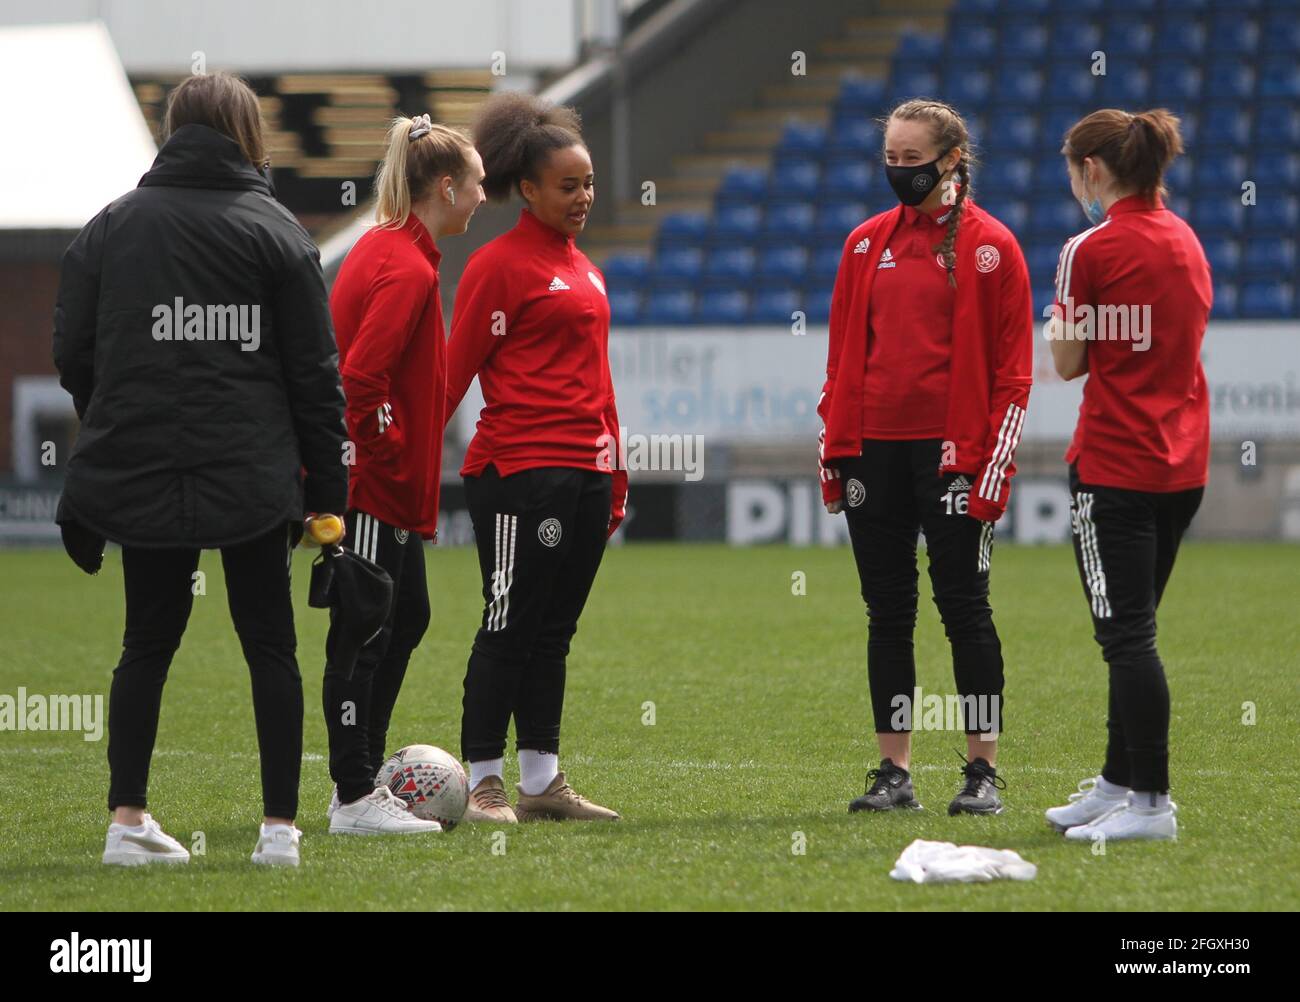 Chesterfield, UK. 25th April 2021. Sheffield United players arrive ahead of the FA Womens Championship game between Sheffield United and Liverpool FC at the Technique Stadium in Chesterfield Credit: SPP Sport Press Photo. /Alamy Live News Stock Photo